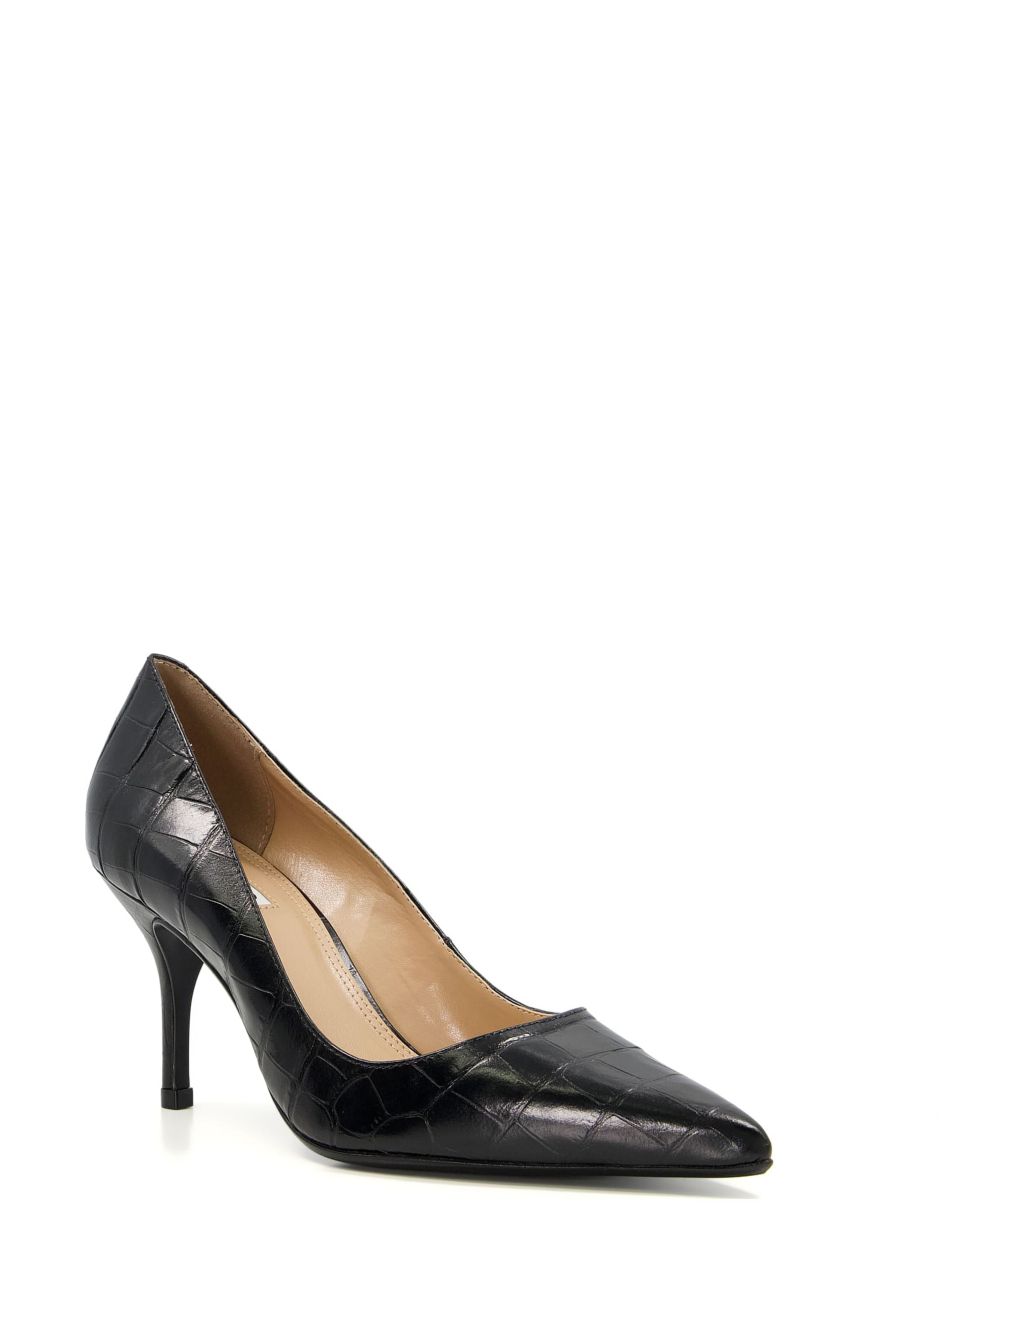 Leather Croc Stiletto Pointed Court Shoes | Dune London | M&S